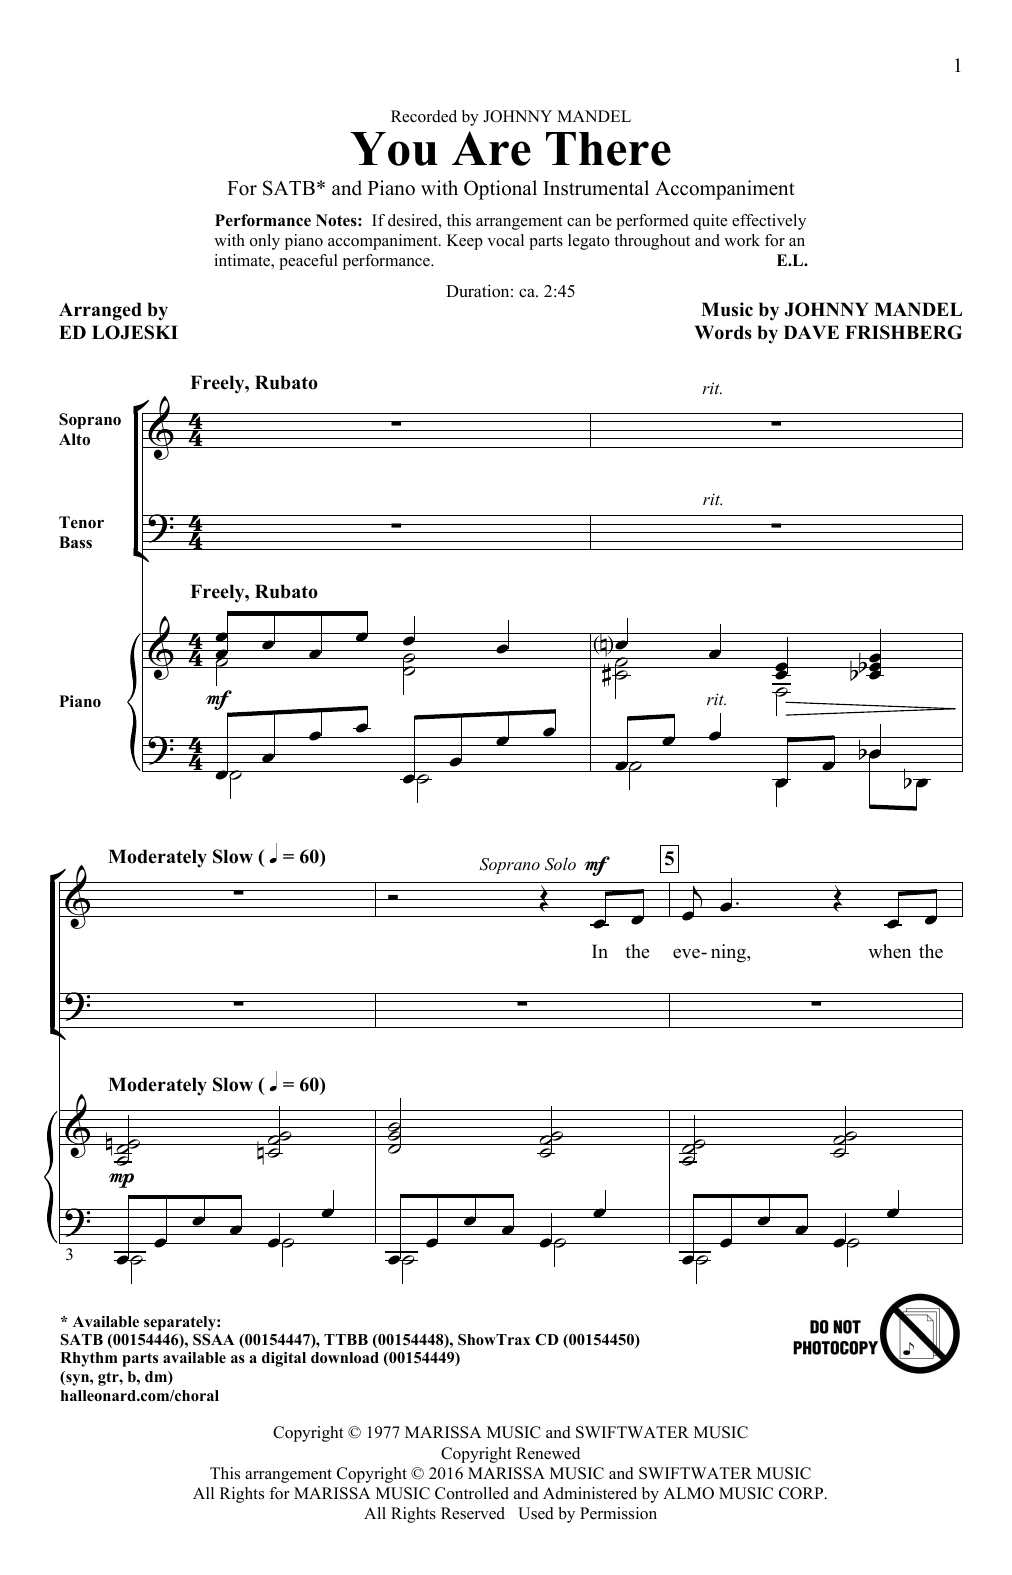 Download Ed Lojeski You Are There Sheet Music